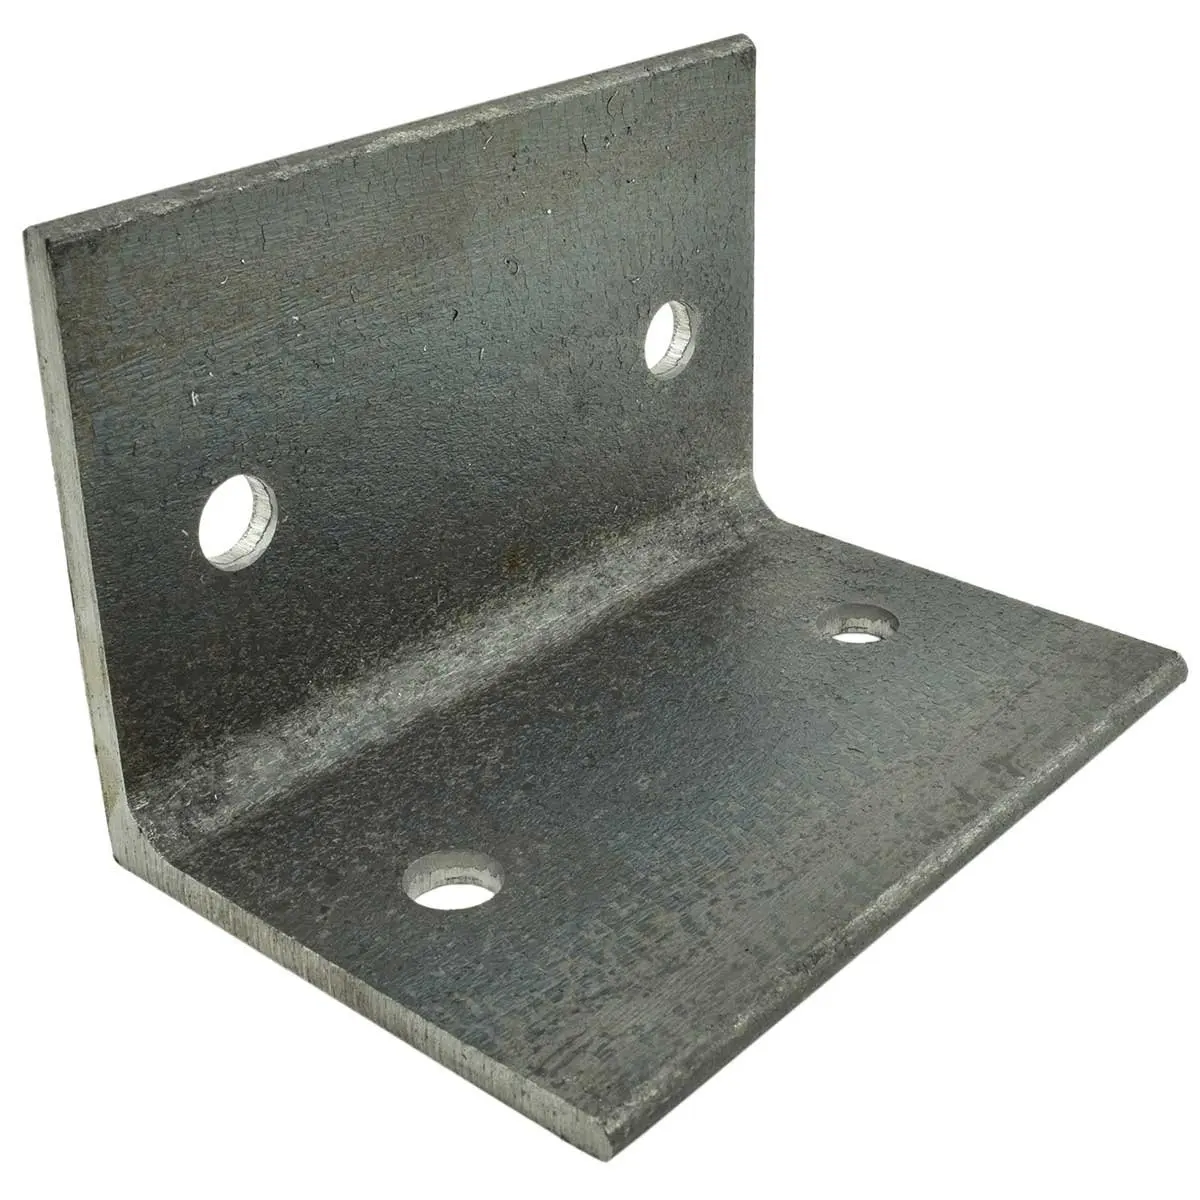 9/16 Holes for 1/2 Bolts 4 Custom Fabricated 6 x 6 x 1/4 Hot Rolled A36 Steel Base Plate with